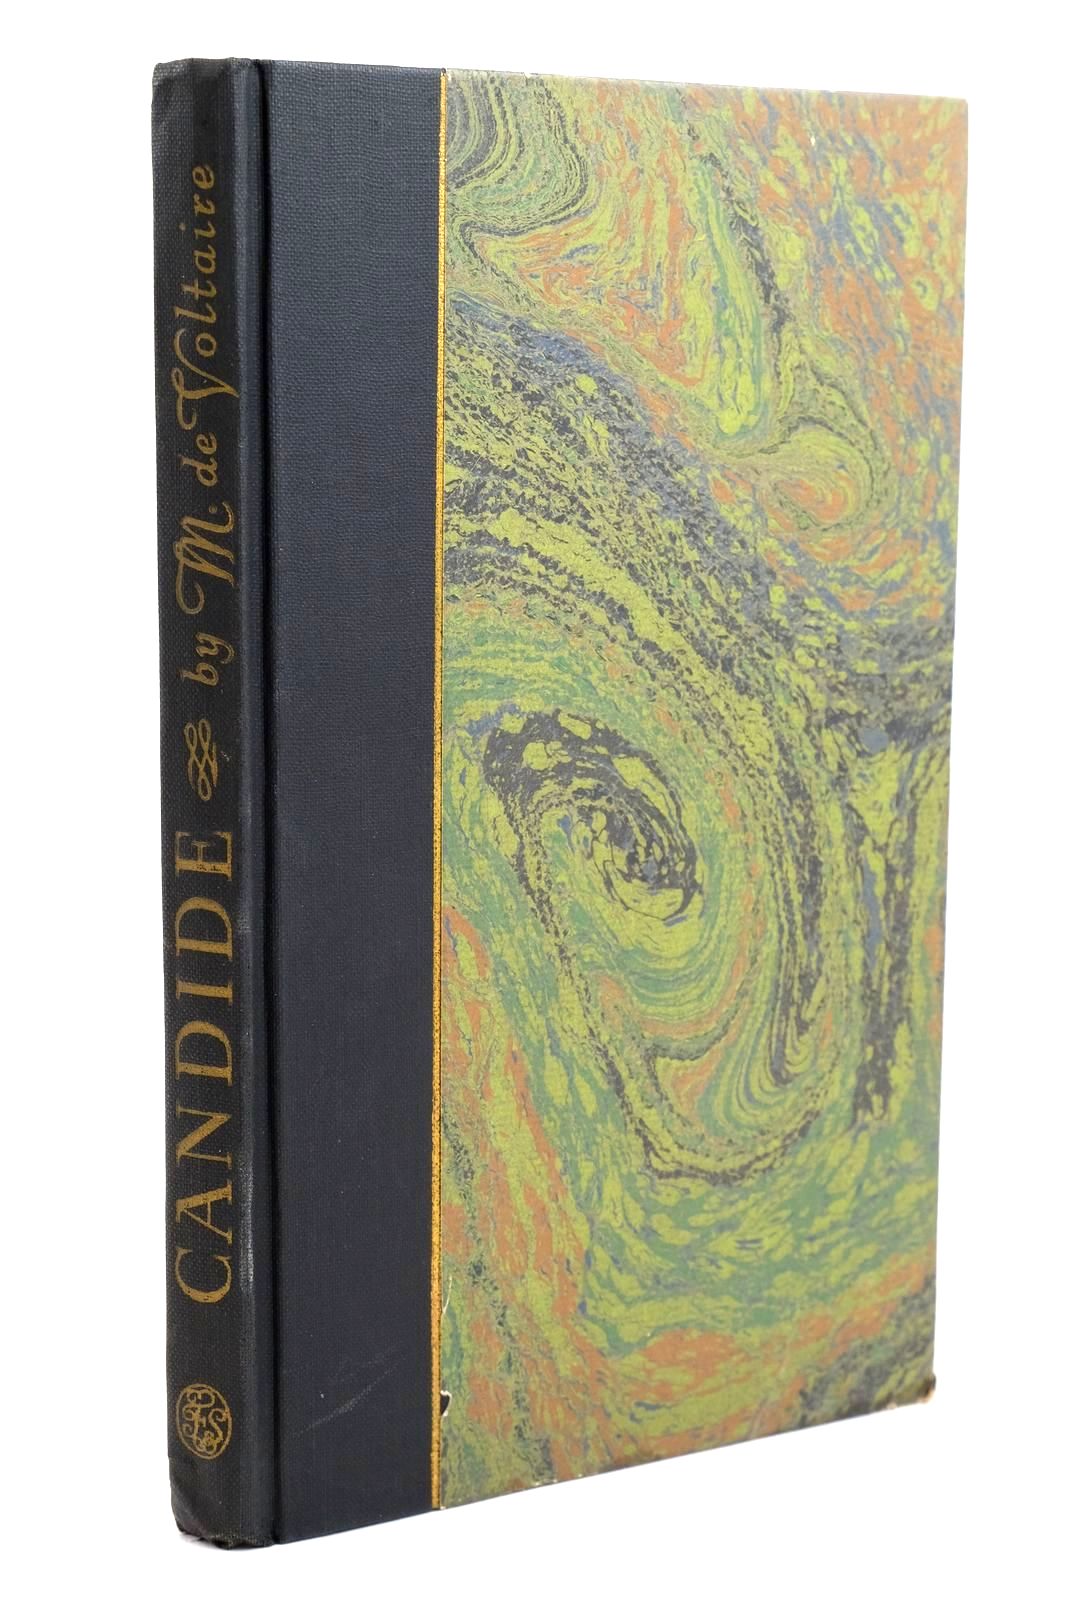 Photo of CANDIDE,OR THE OPTIMIST written by Voltaire, Francois Marie Arouet illustrated by Hobson, Kenneth published by Folio Society (STOCK CODE: 1320406)  for sale by Stella & Rose's Books